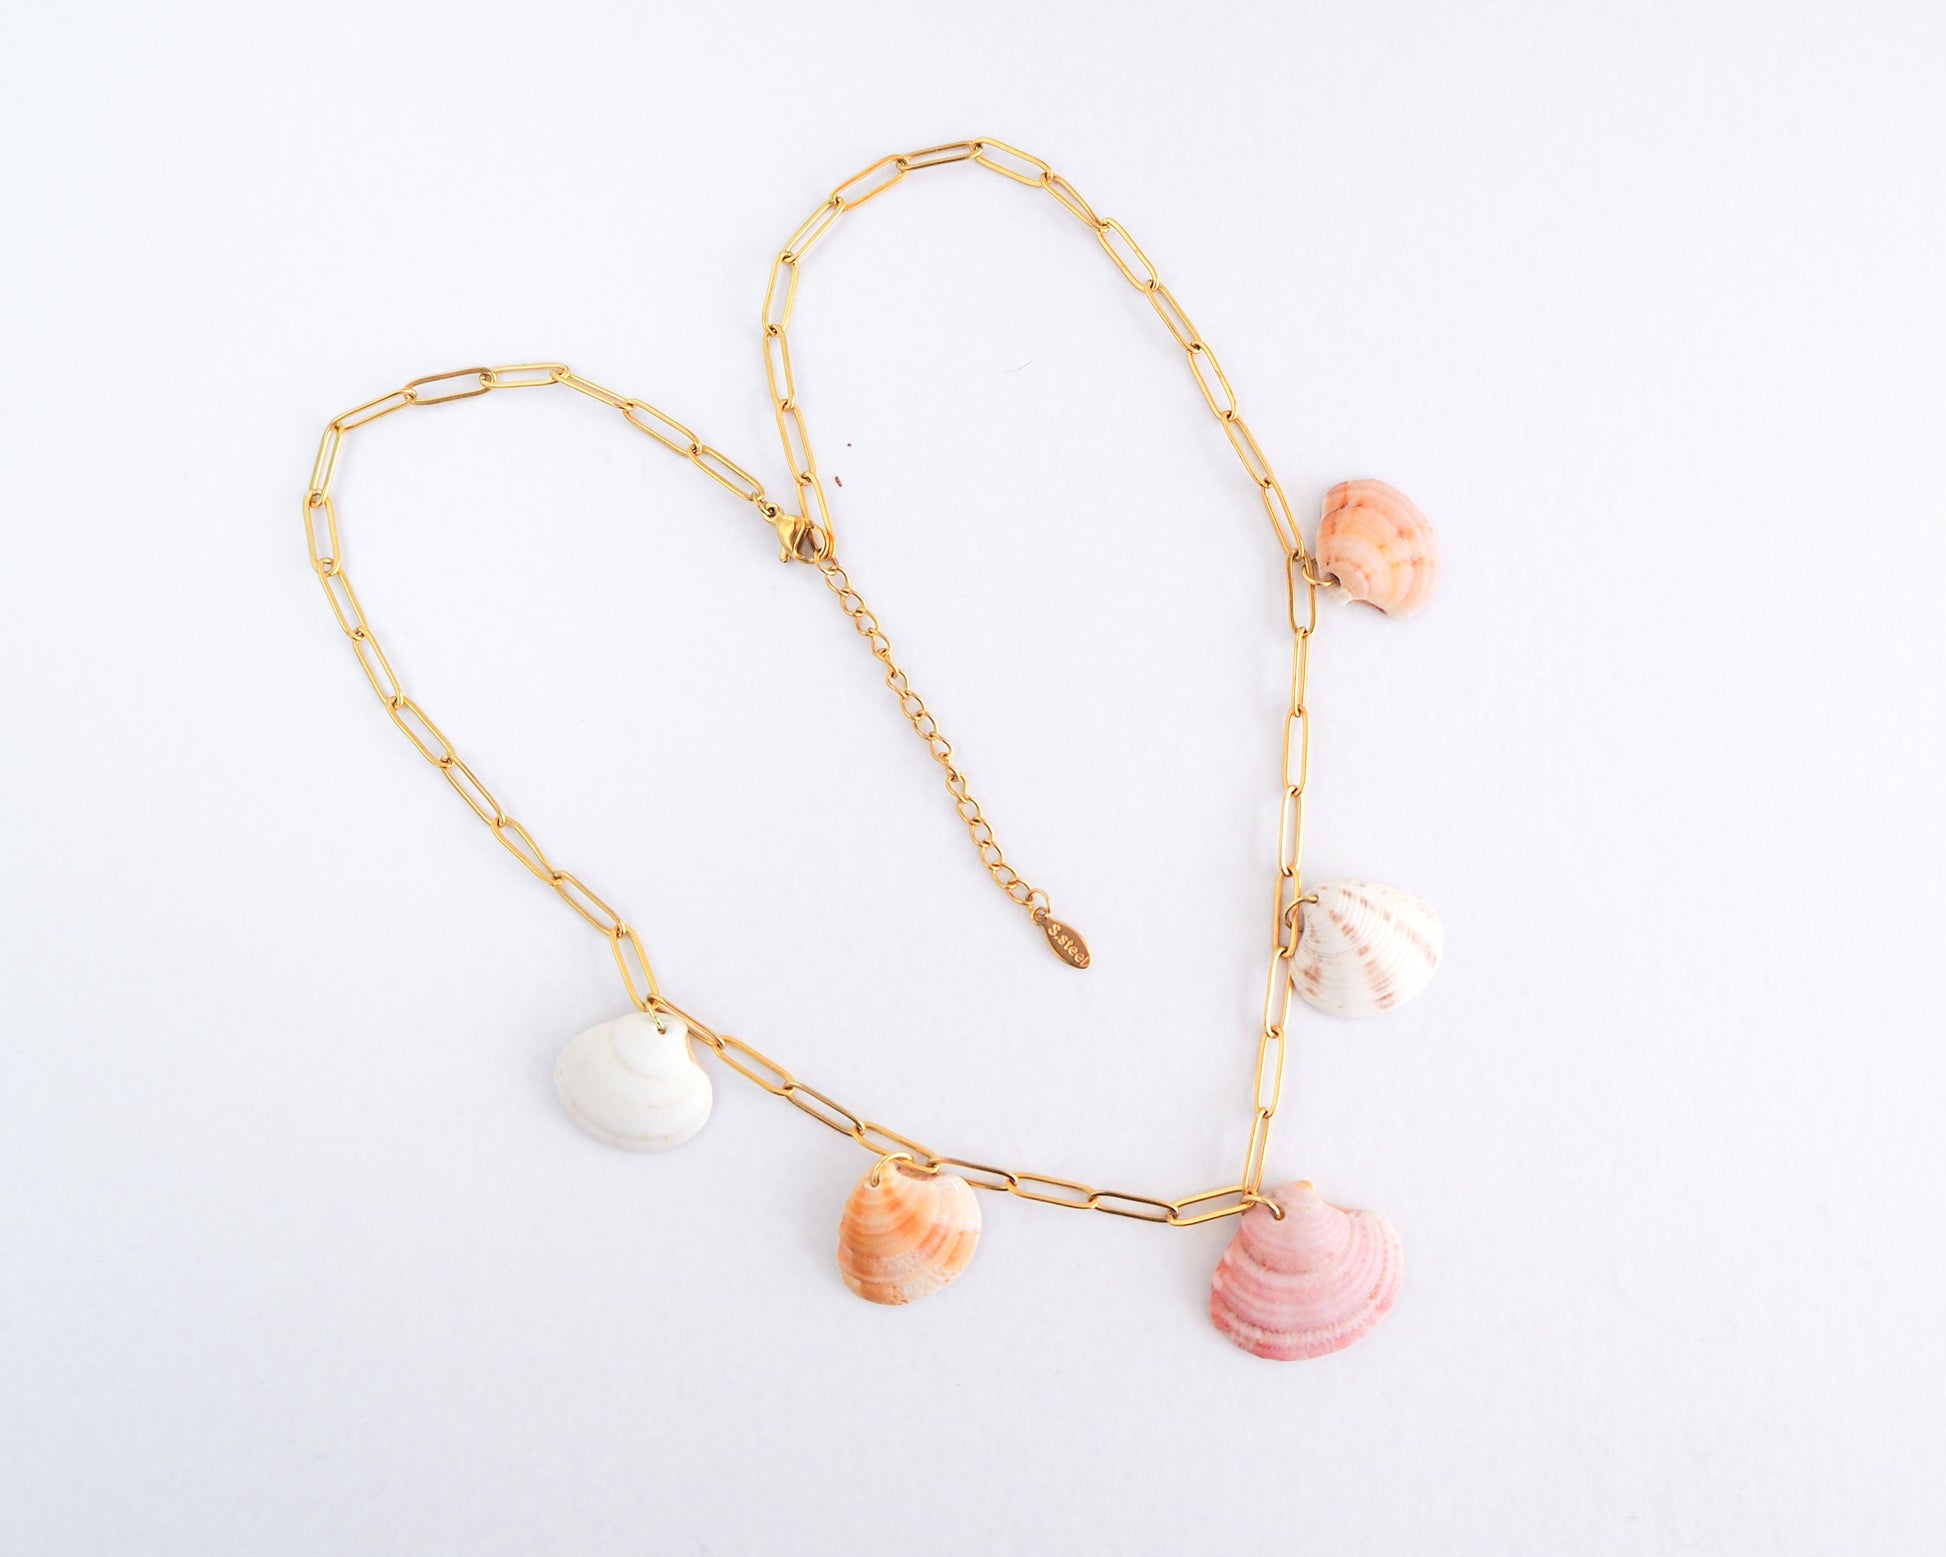 Venus Shell Charm Necklace with Gold Chain, Real Shell Jewelry, Sea by Lou